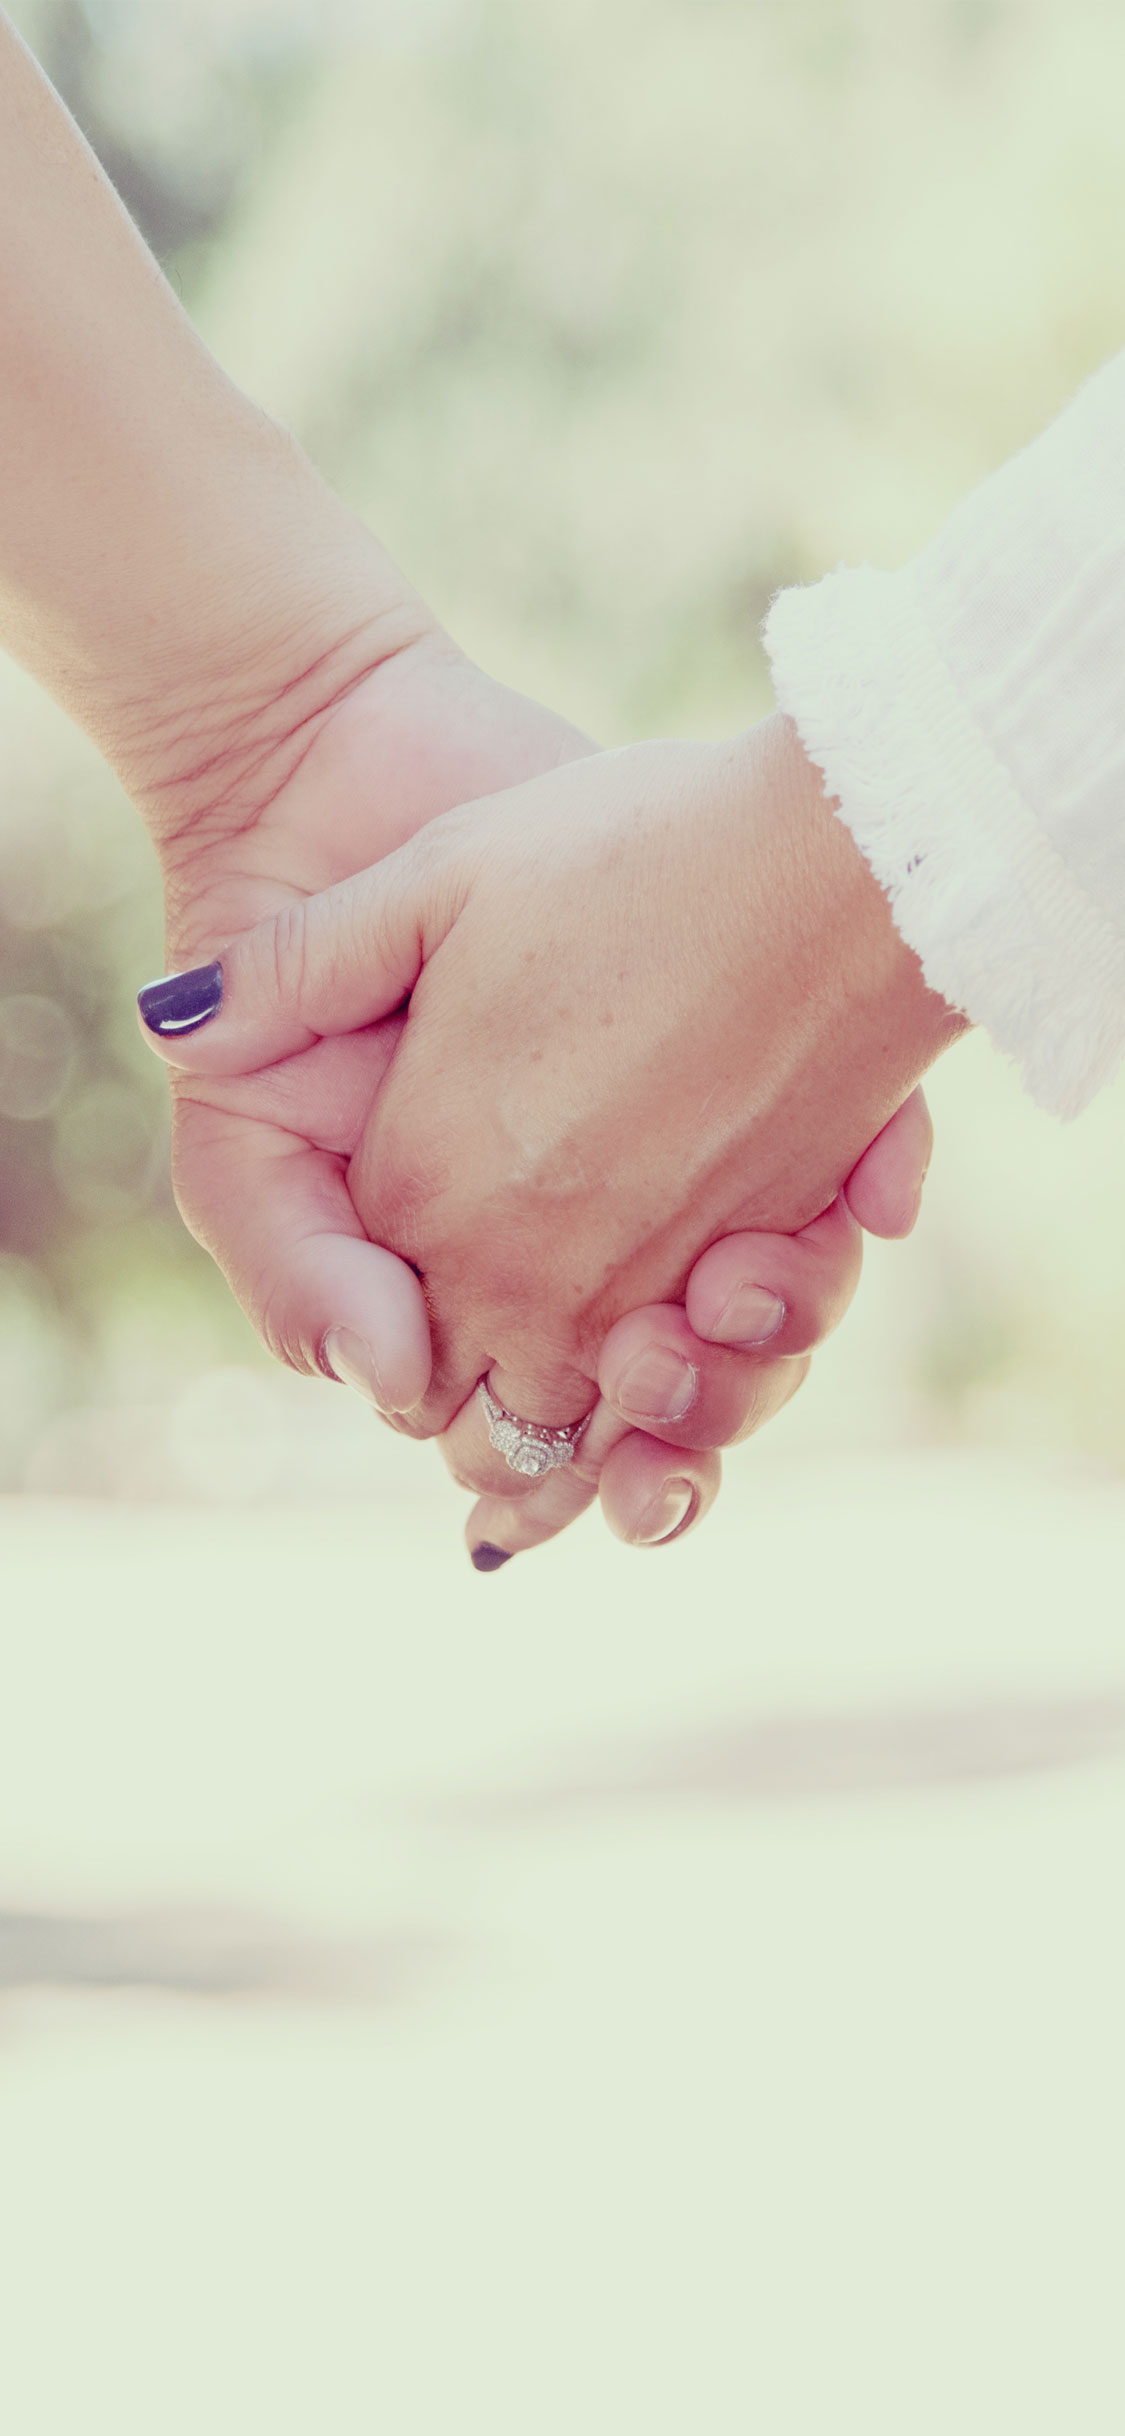 Cute Couple Holding Hands iPhone Wallpaper